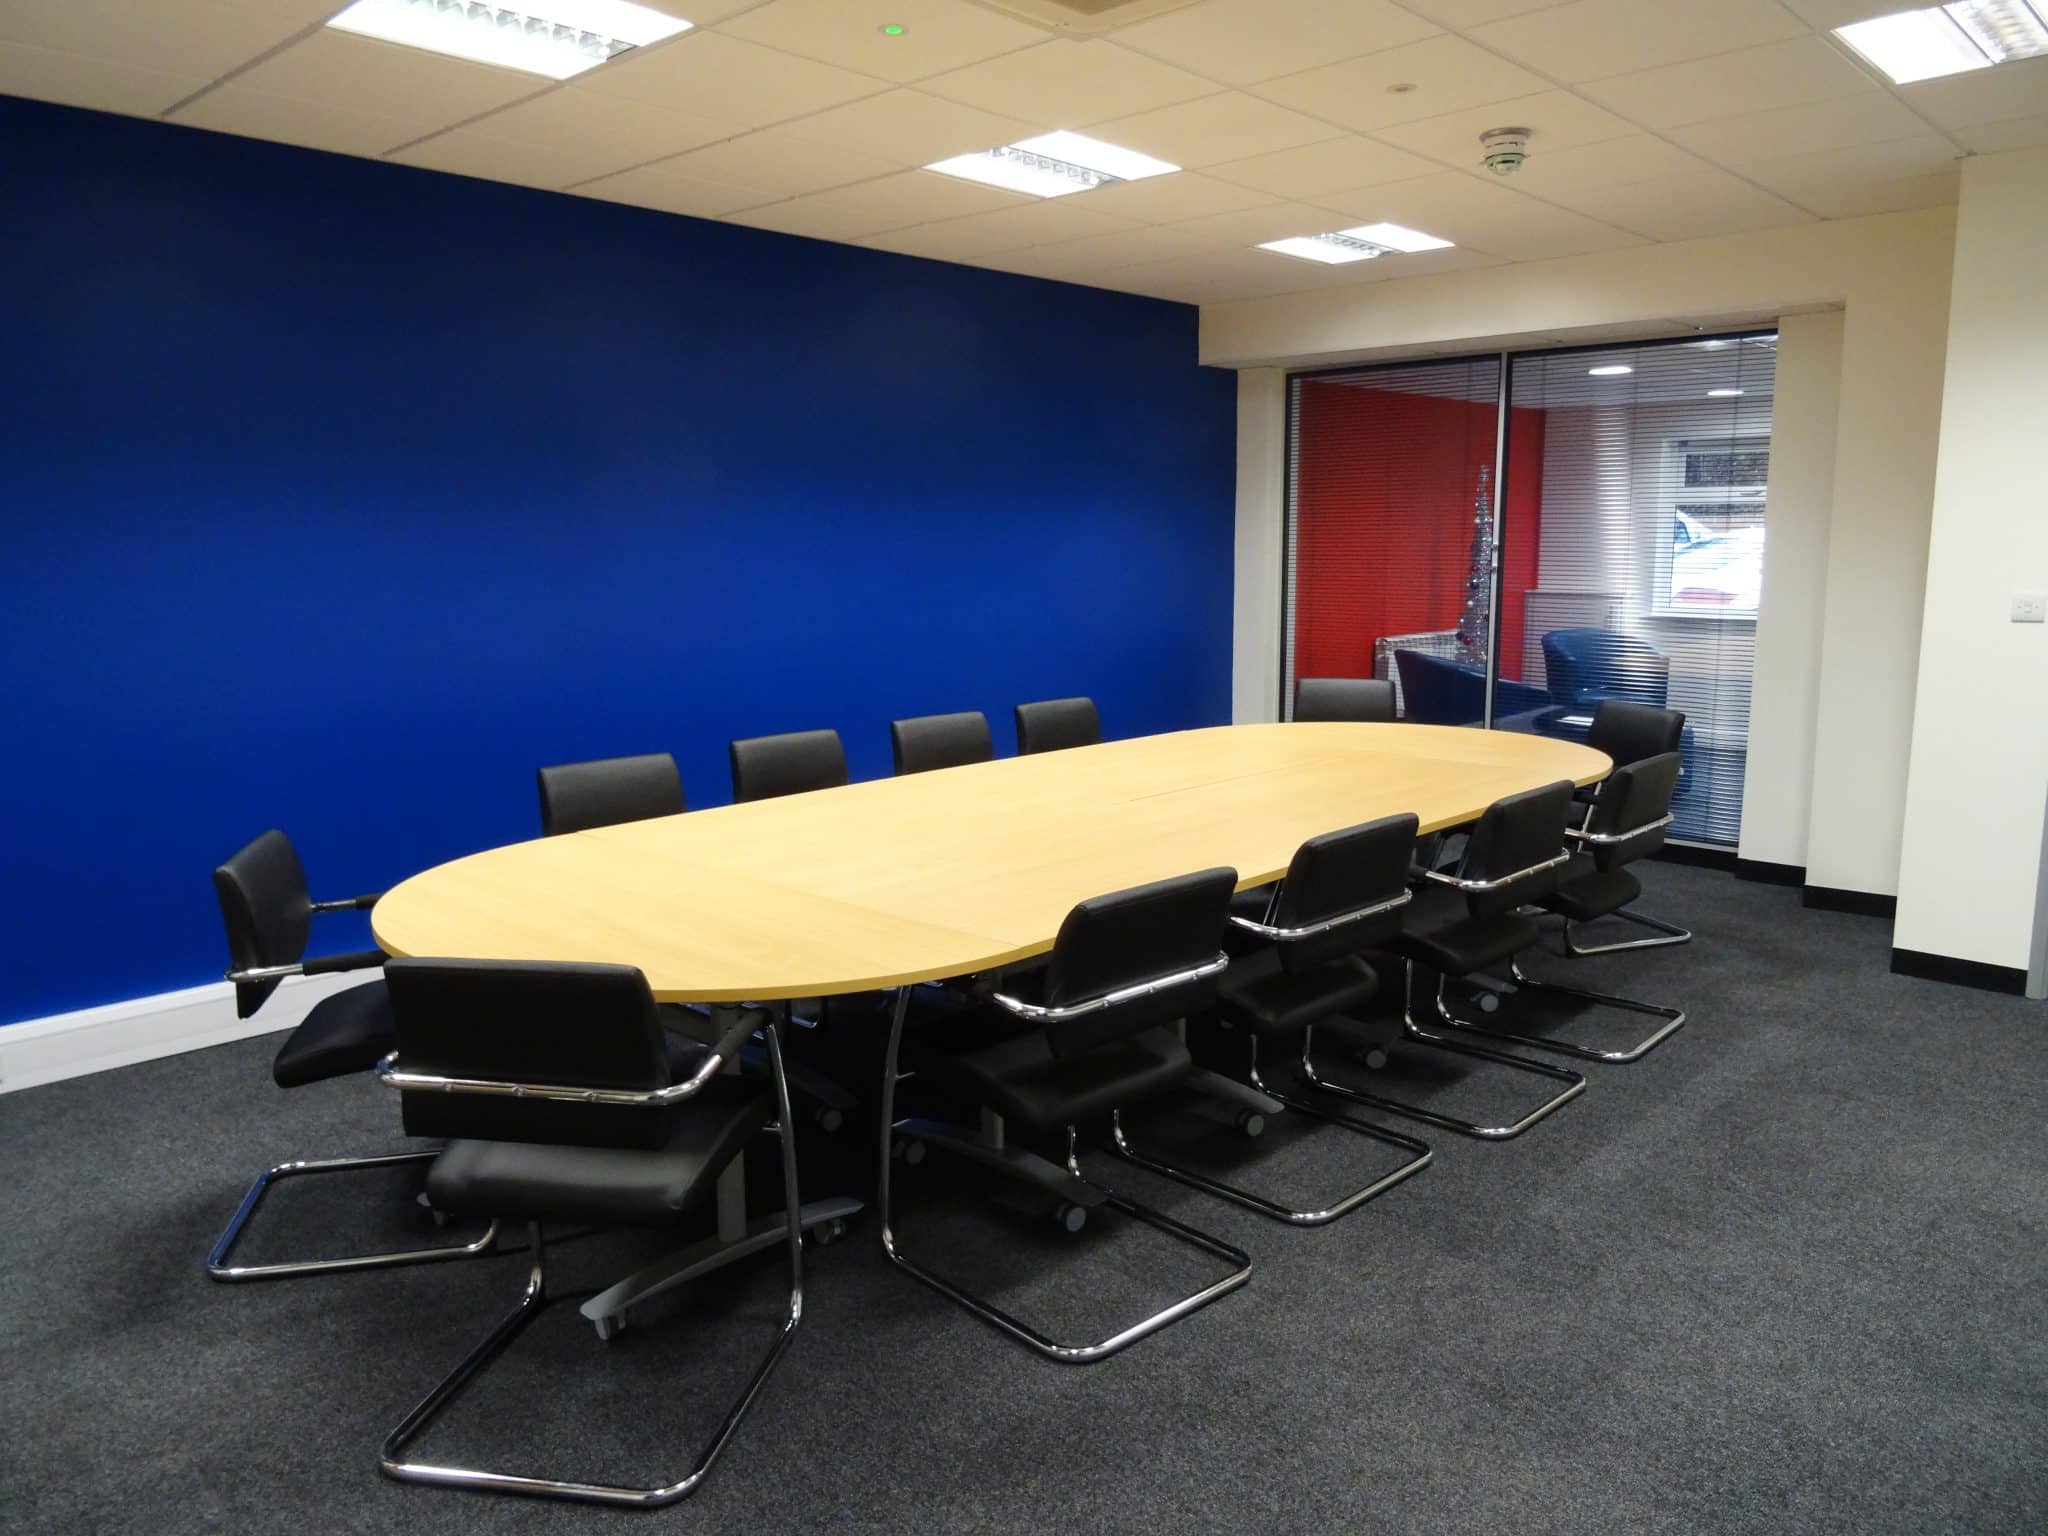 Meeting Room at Bryland Fire Protection